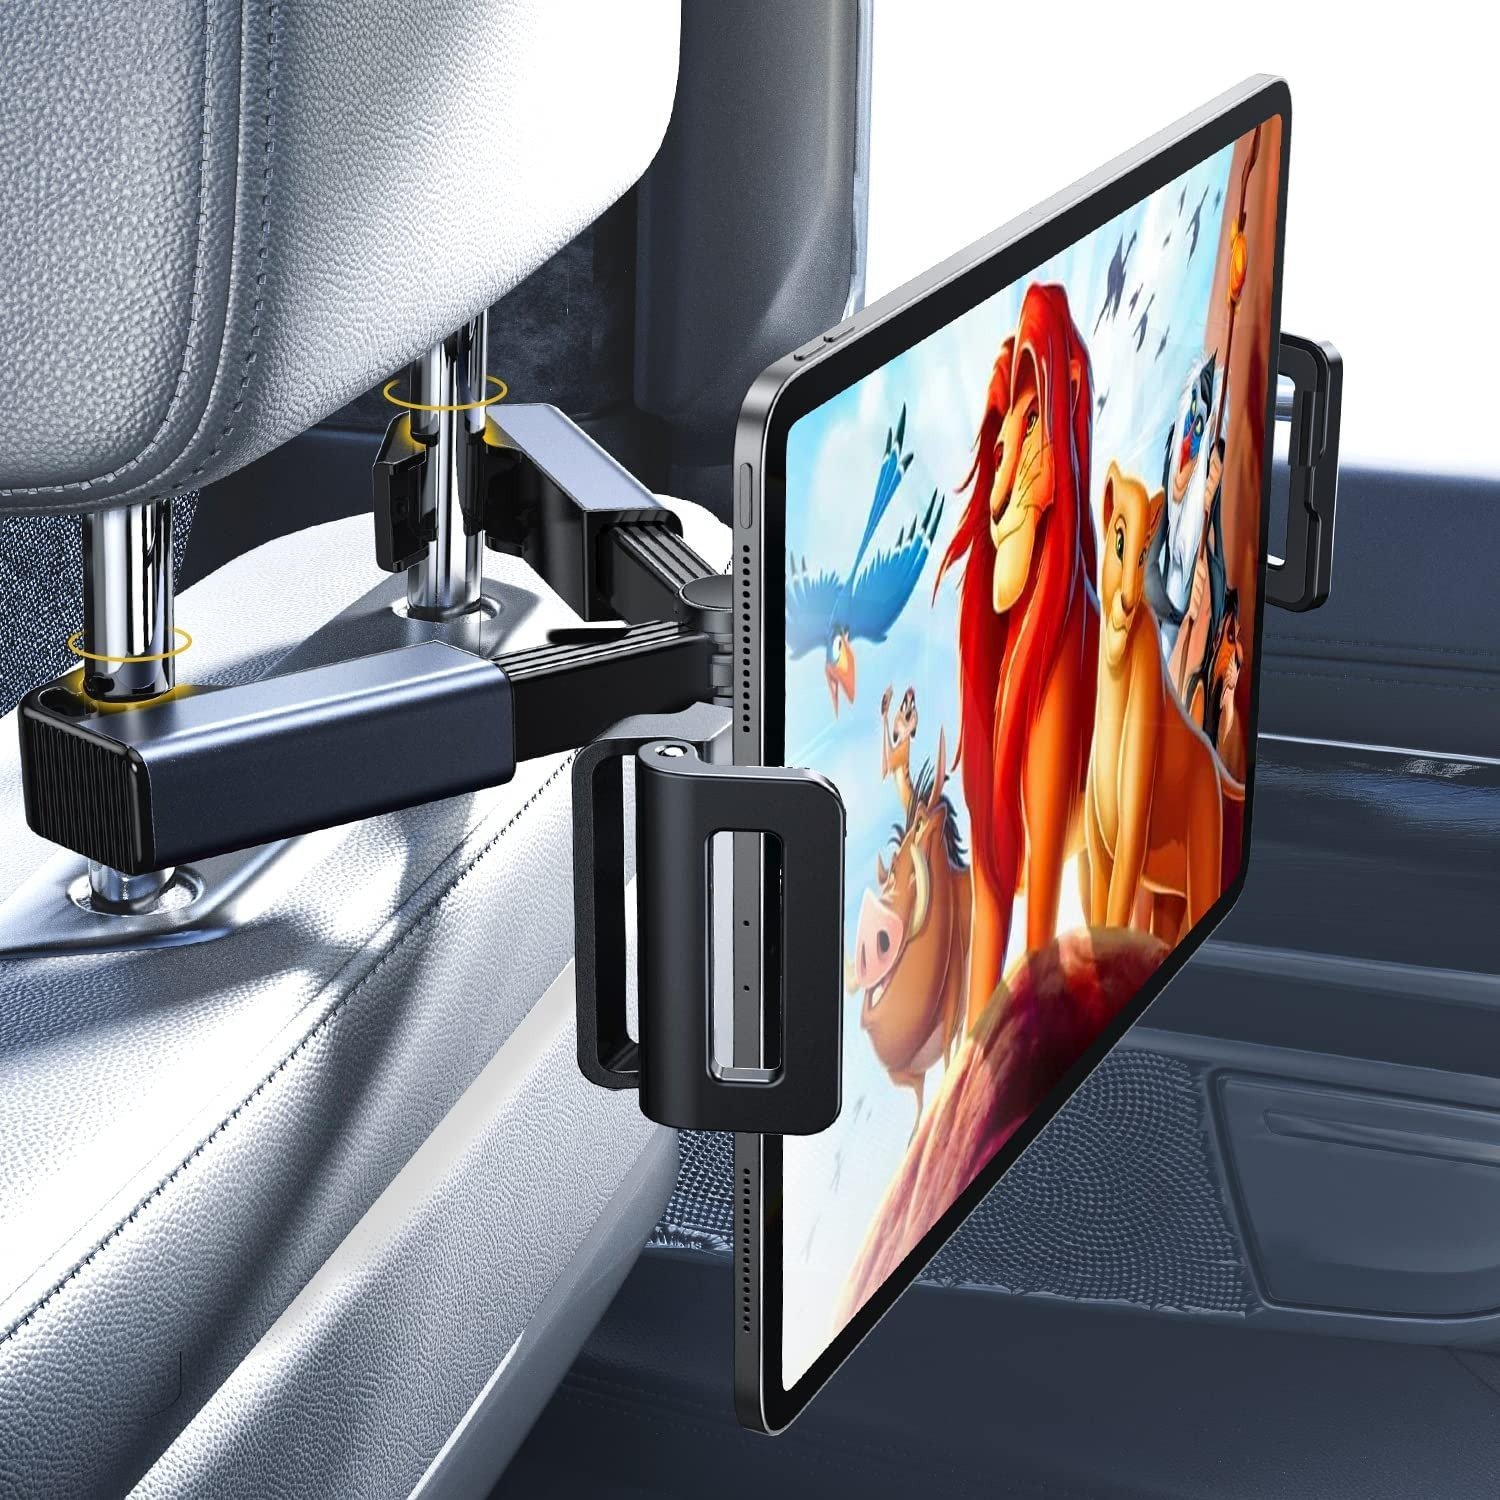 (🔥HOT SALE - SAVE 49% OFF) Headrest Tablet Mount🎁BUY 2 FREE SHIPPING